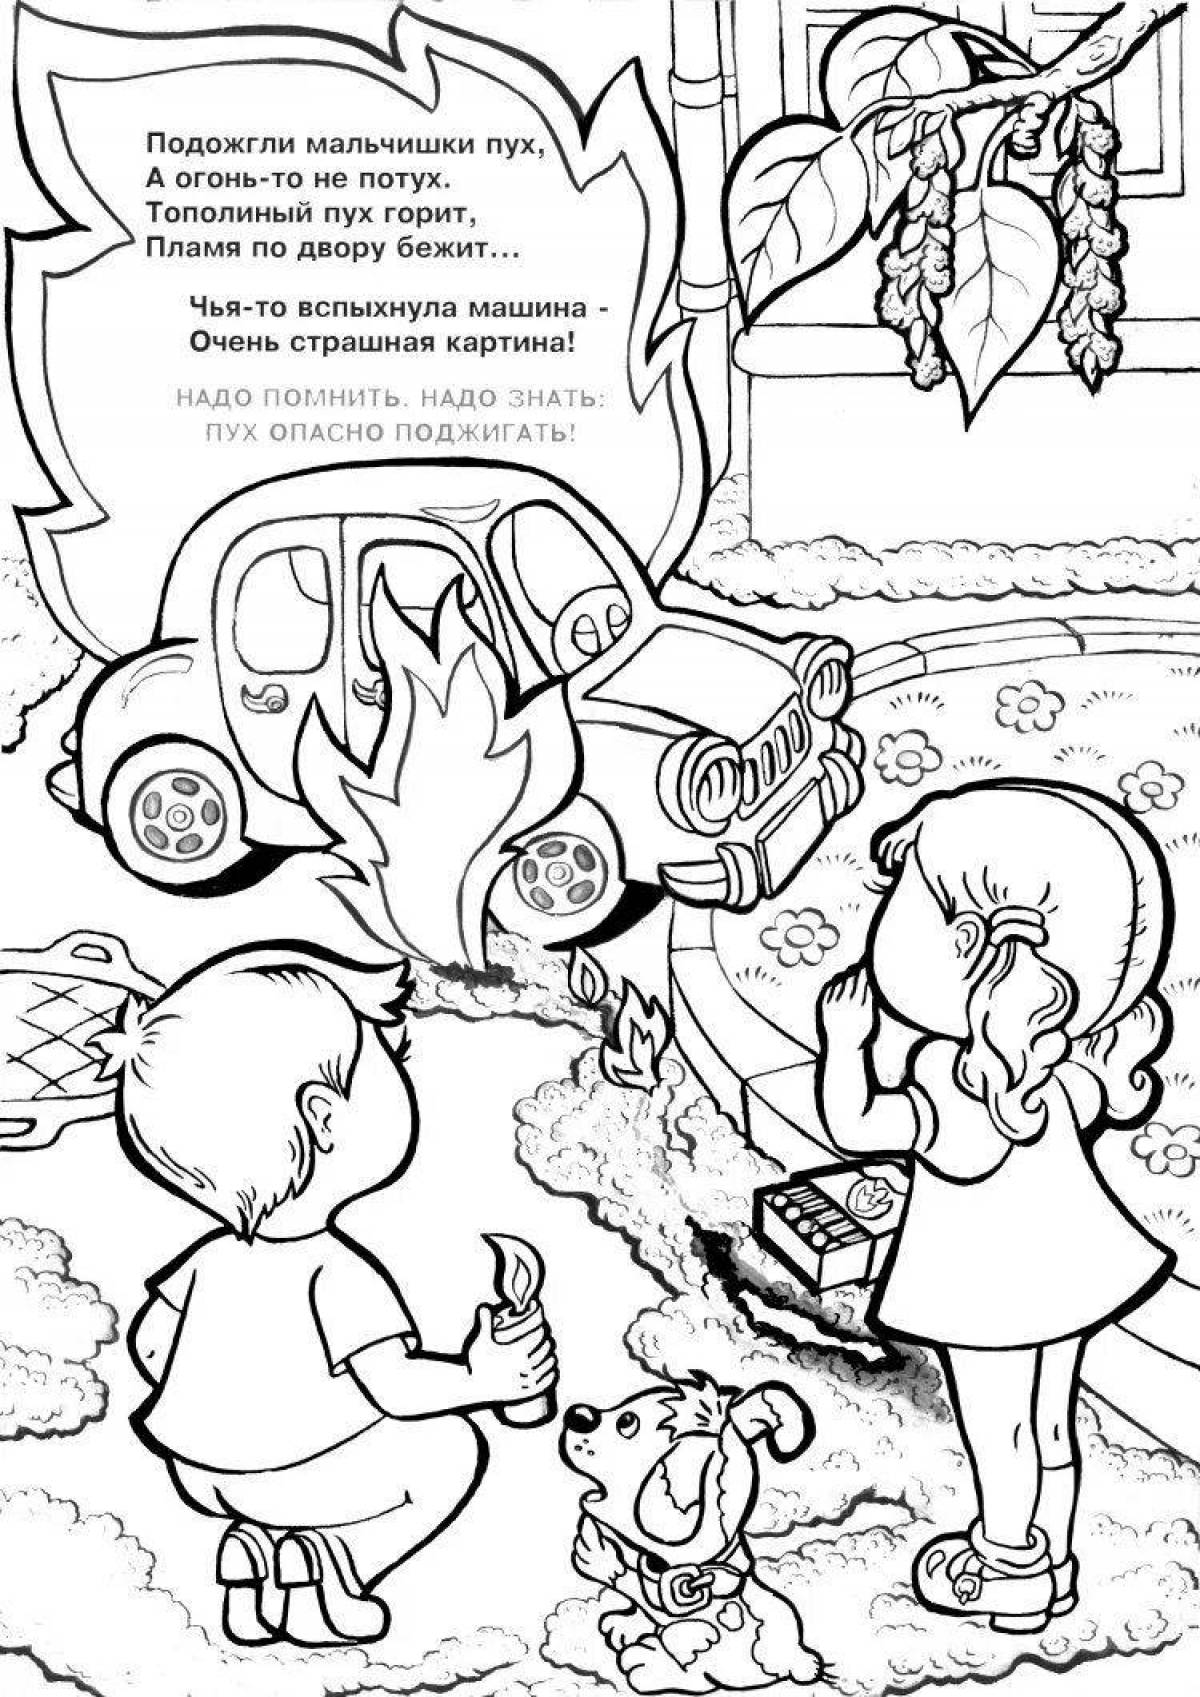 Charming fire hose coloring page